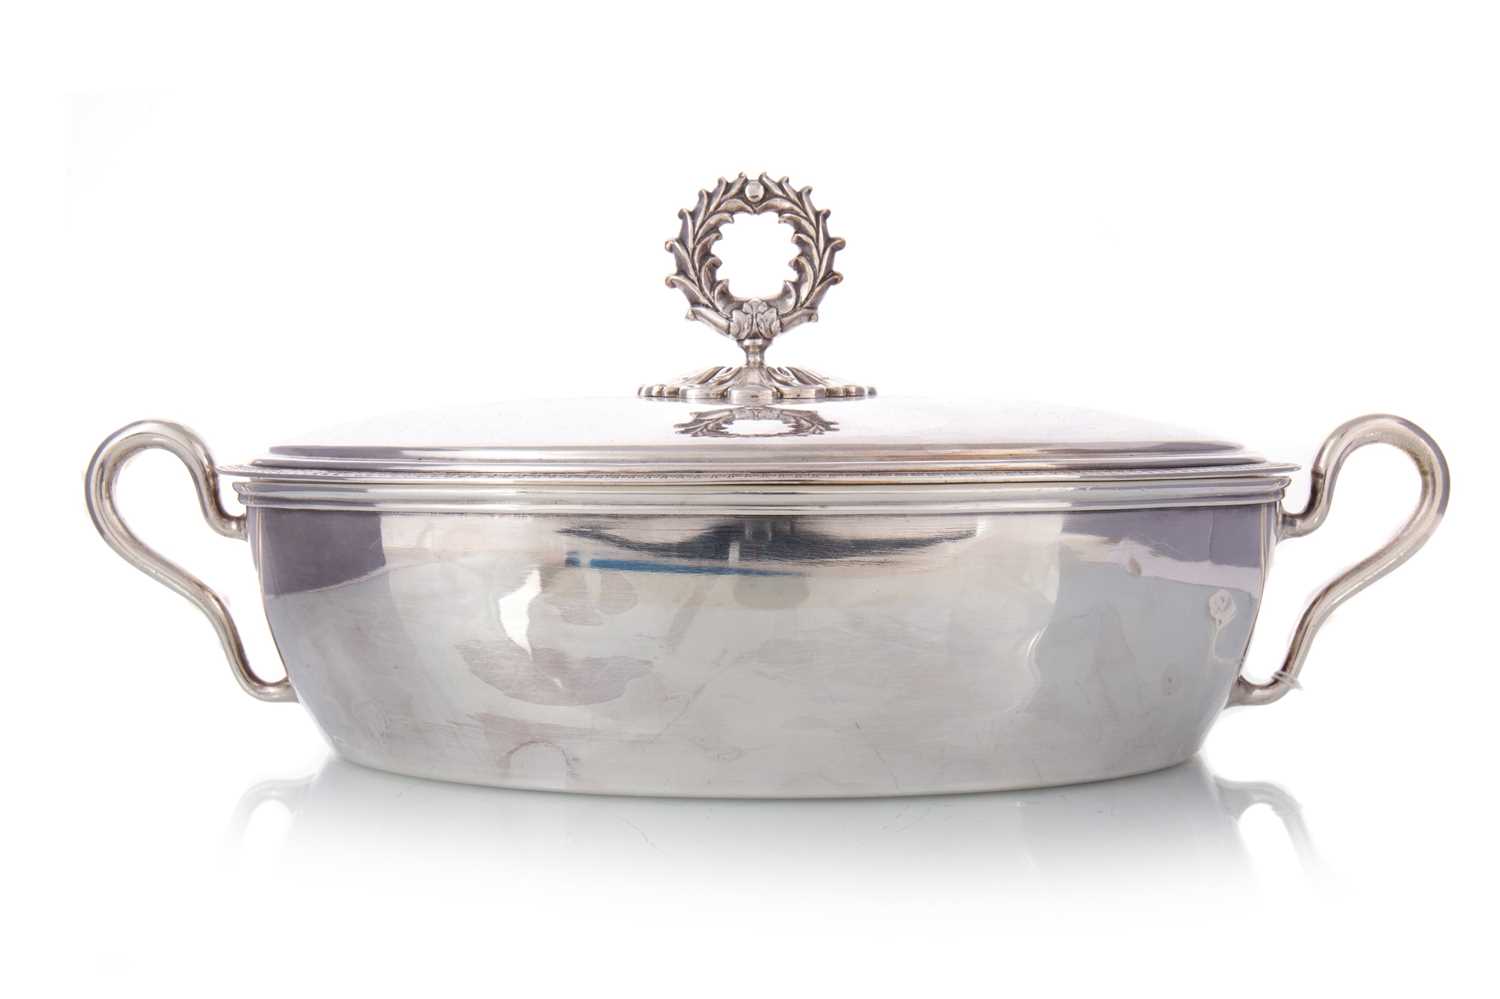 Lot 11 - EARLY 20TH CENTURY FRENCH OVAL SERVING DISH